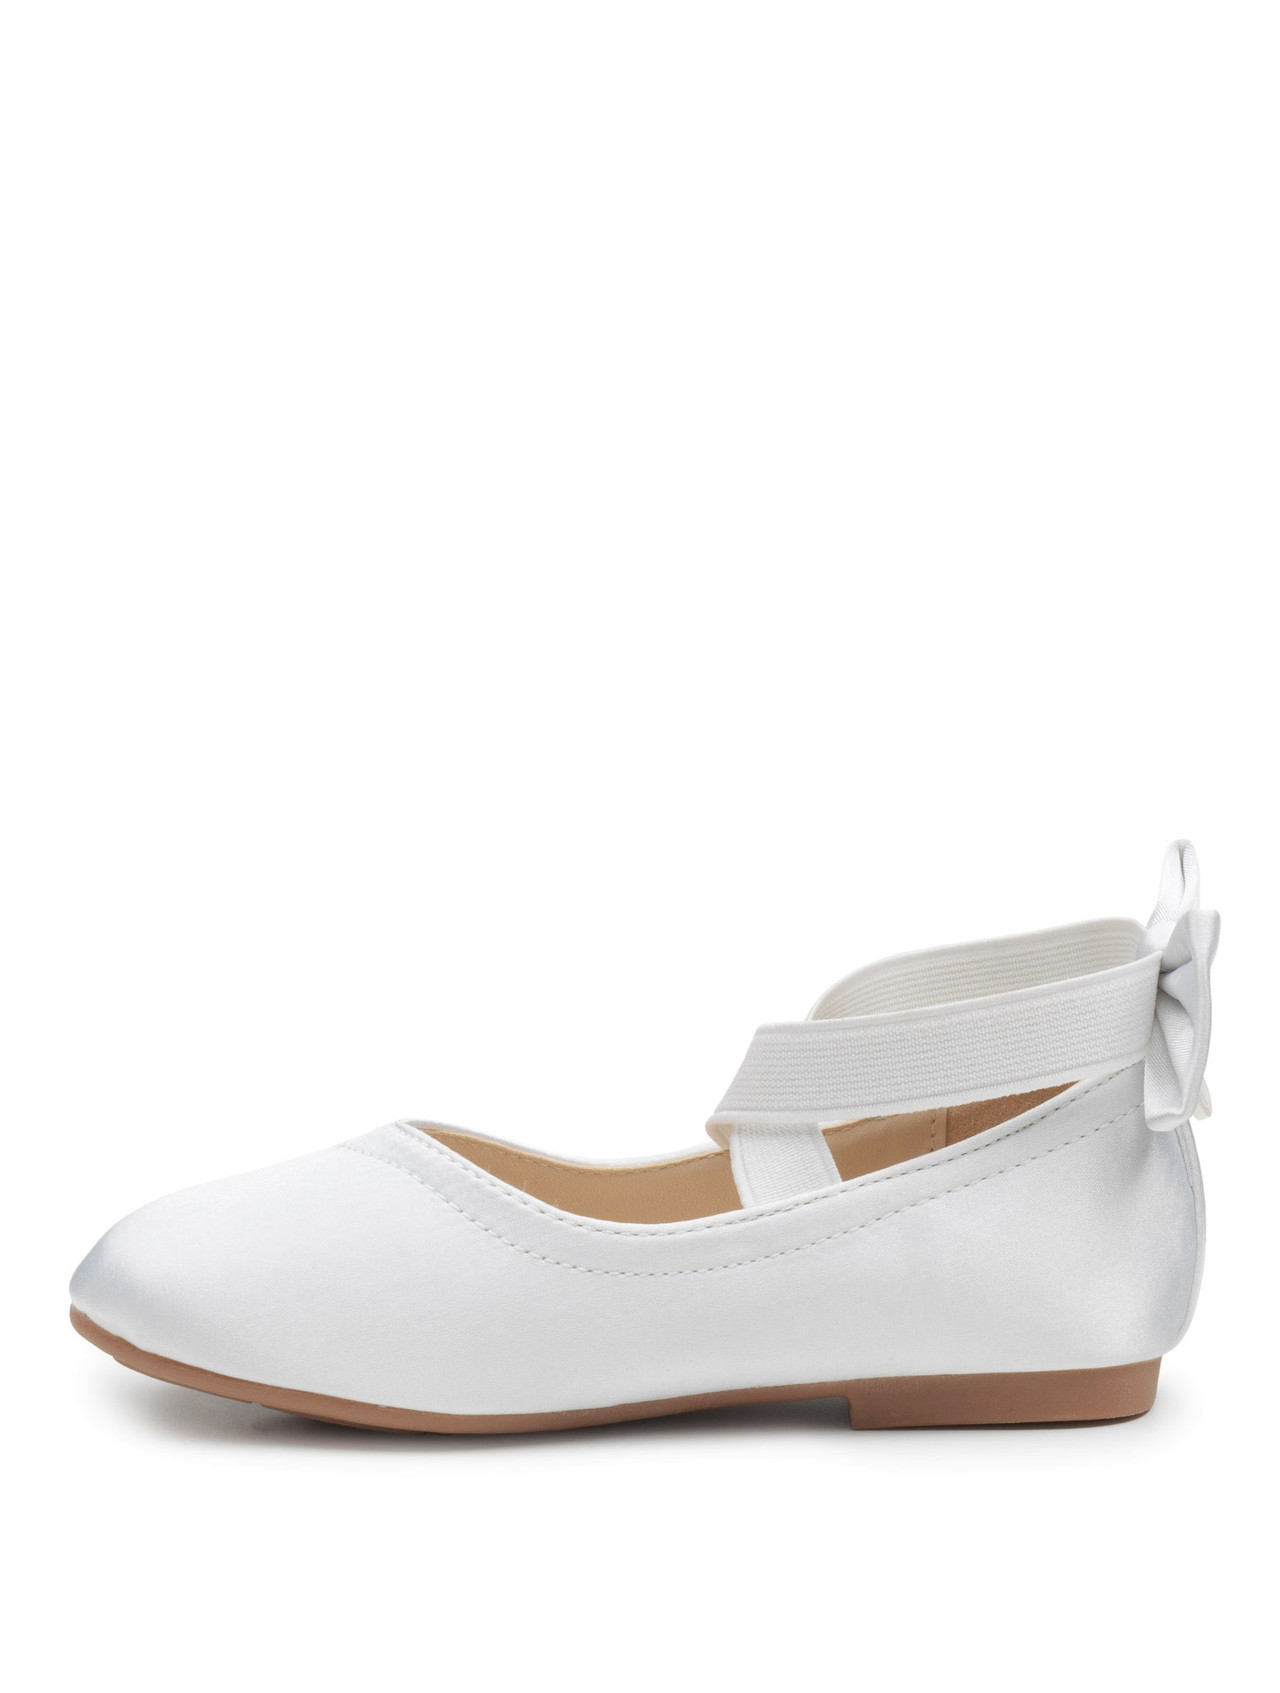 Girls white eloquence shoes | Paisley of London | Eloquence Collection ...